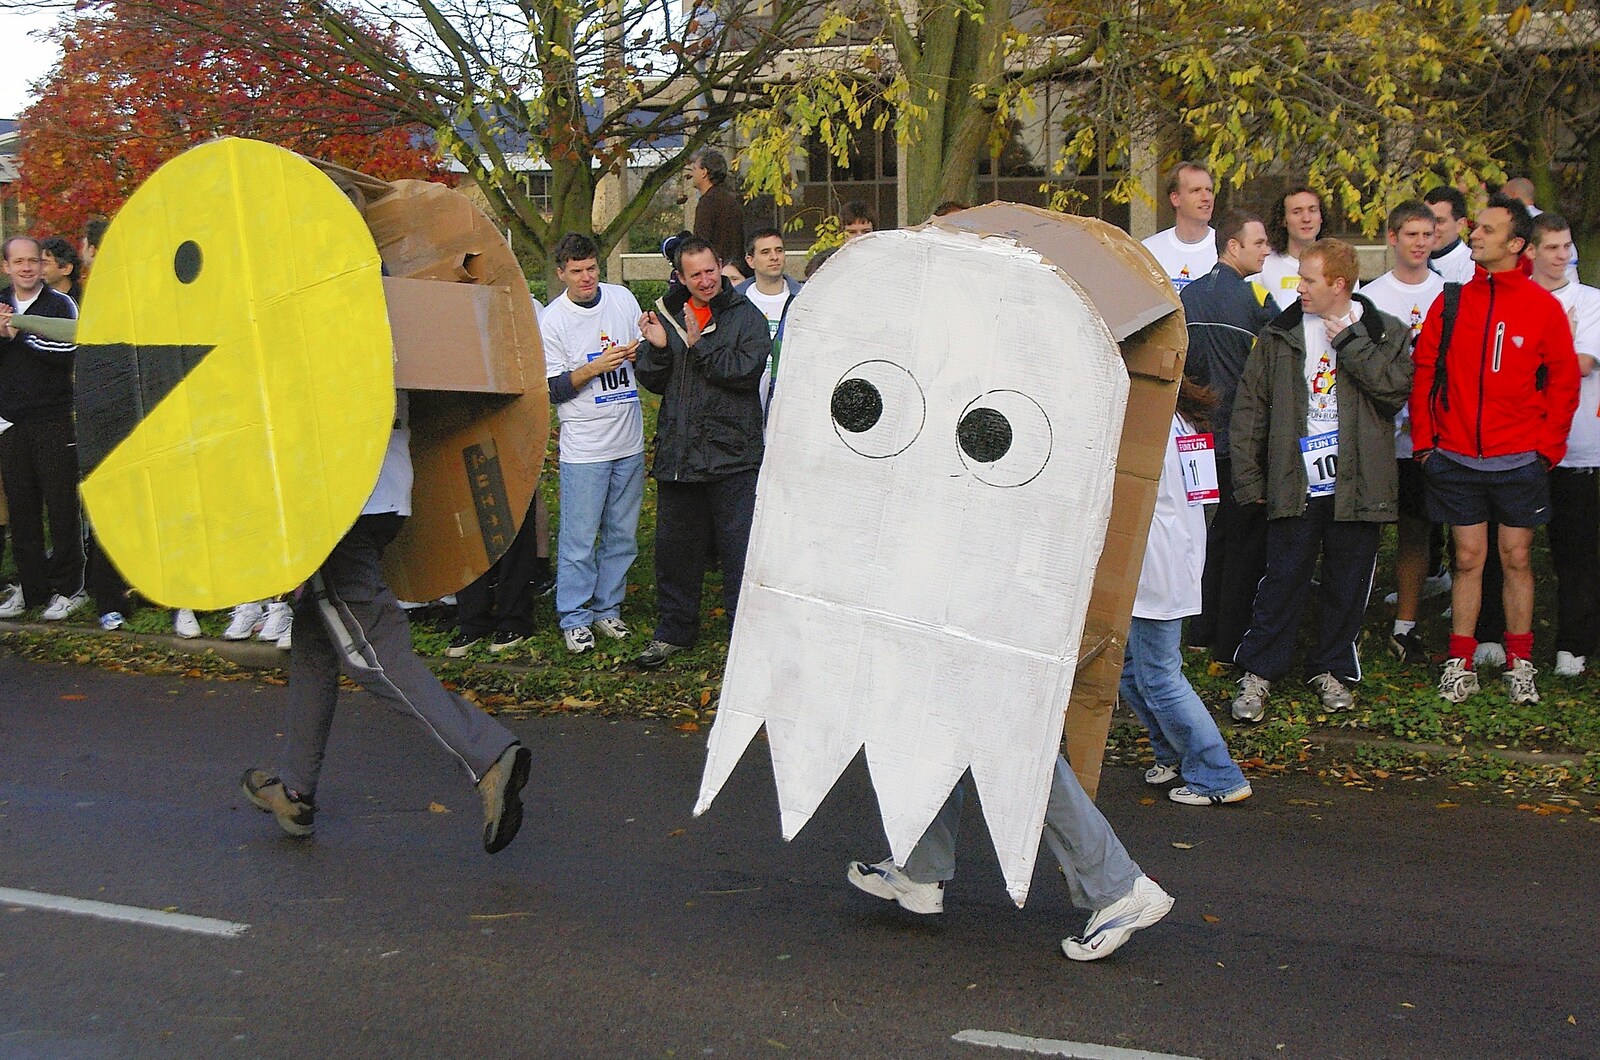 Like a scene from the game, a ghost chases Pac Man from Cambridge Science Park "Children in Need" Fun Run, Milton Road, Cambridge - 17th November 2006